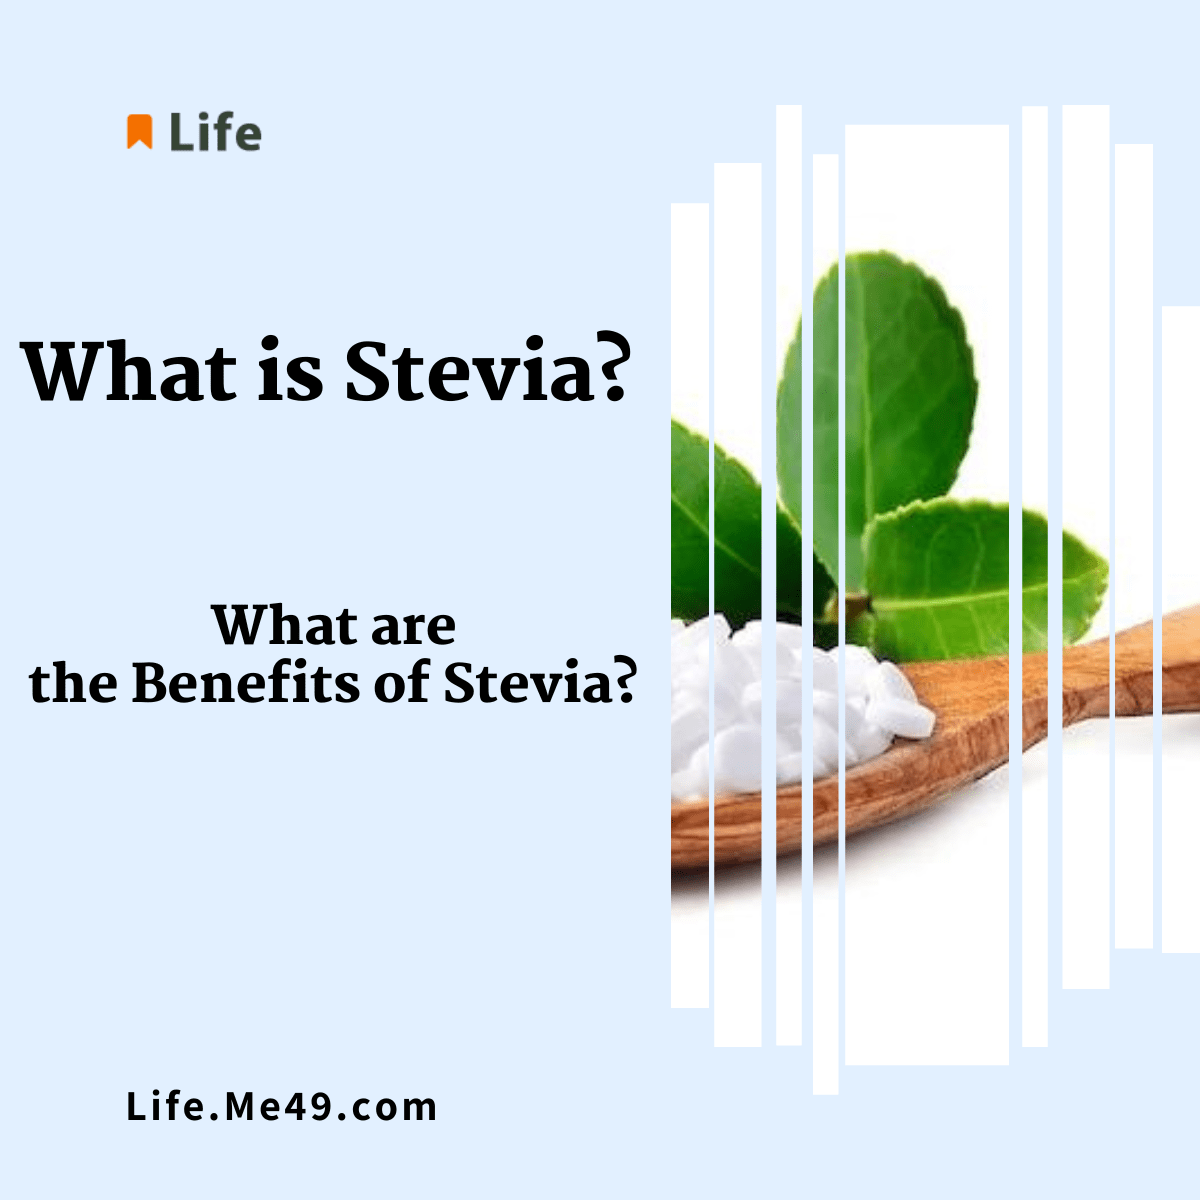 What are the Benefits of Stevia